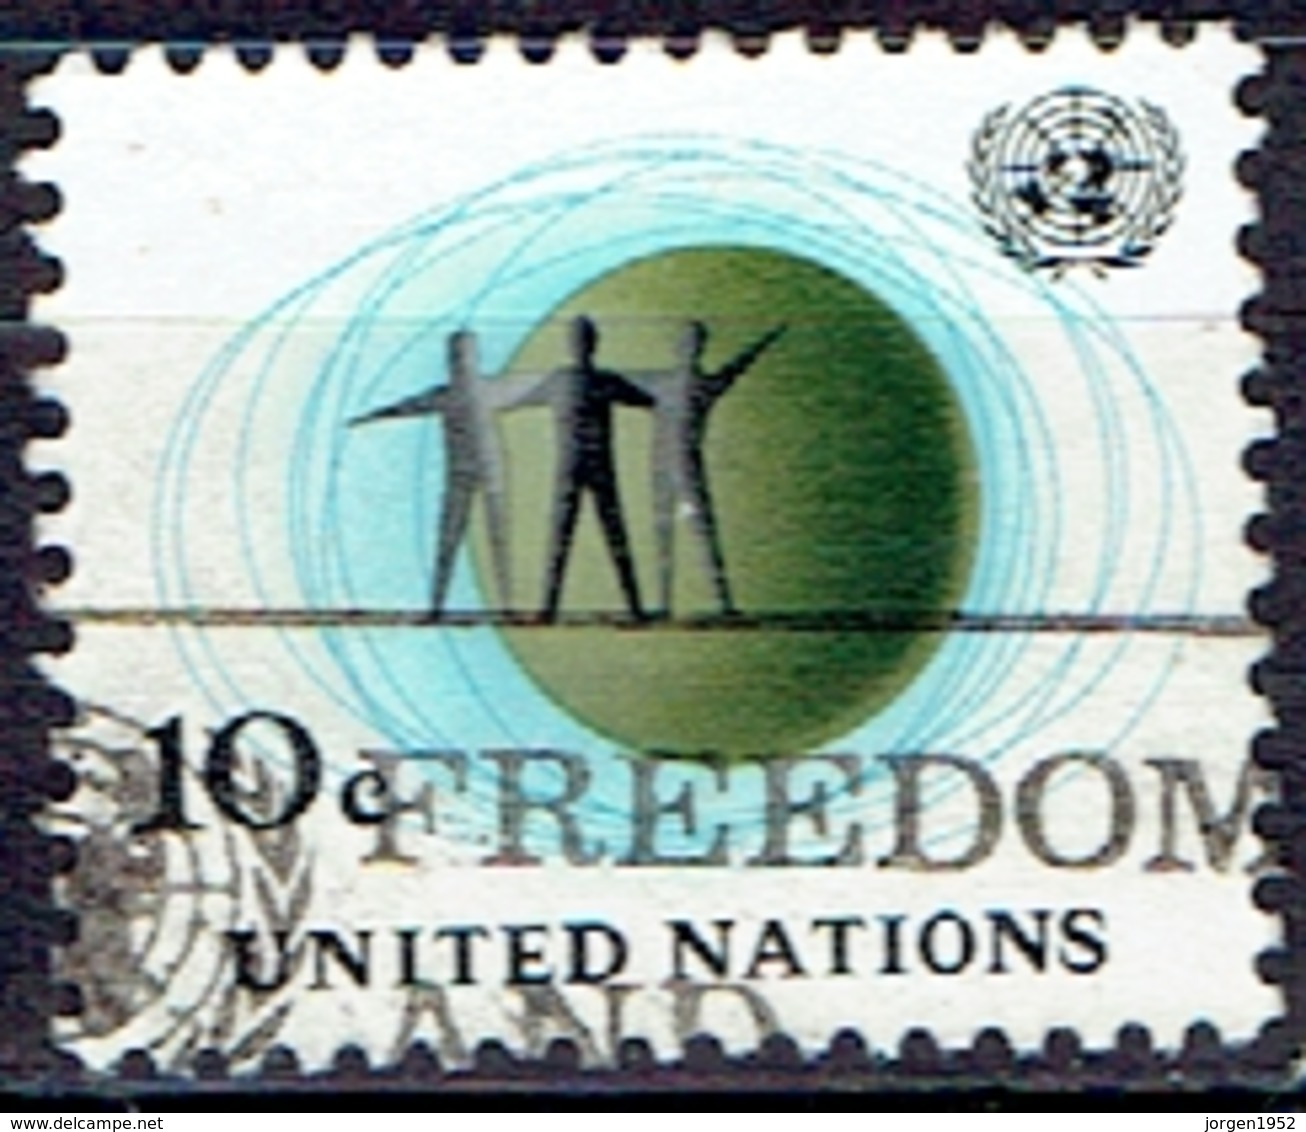 UNITED NATIONS # FROM 1961 STAMPWORLD 103 - Usados